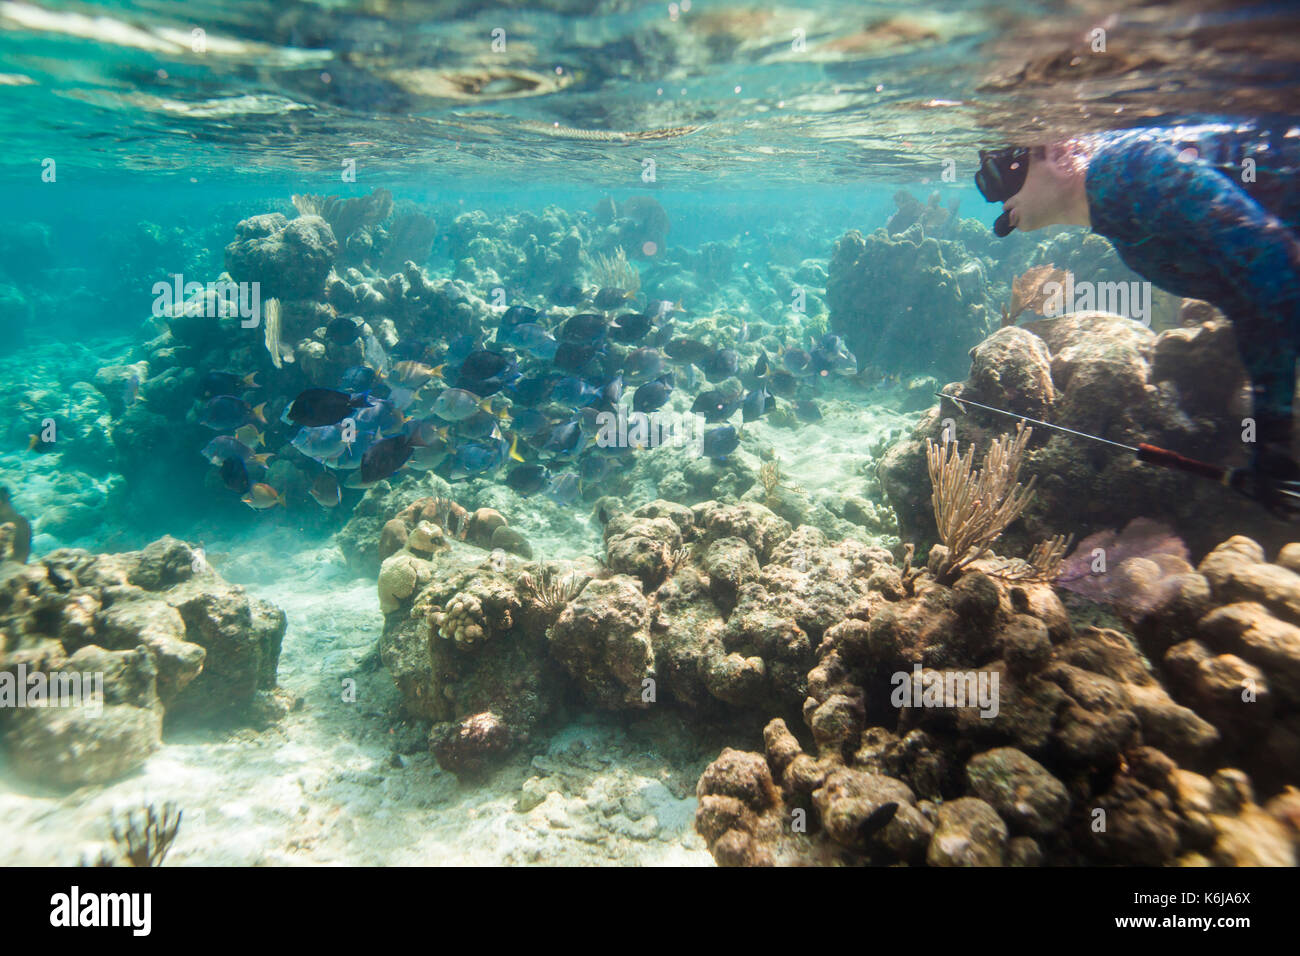 A man with a spear gun snorkels near a school of Tang among reef and coral in shallow water off Utila Island, Honduras. Stock Photo